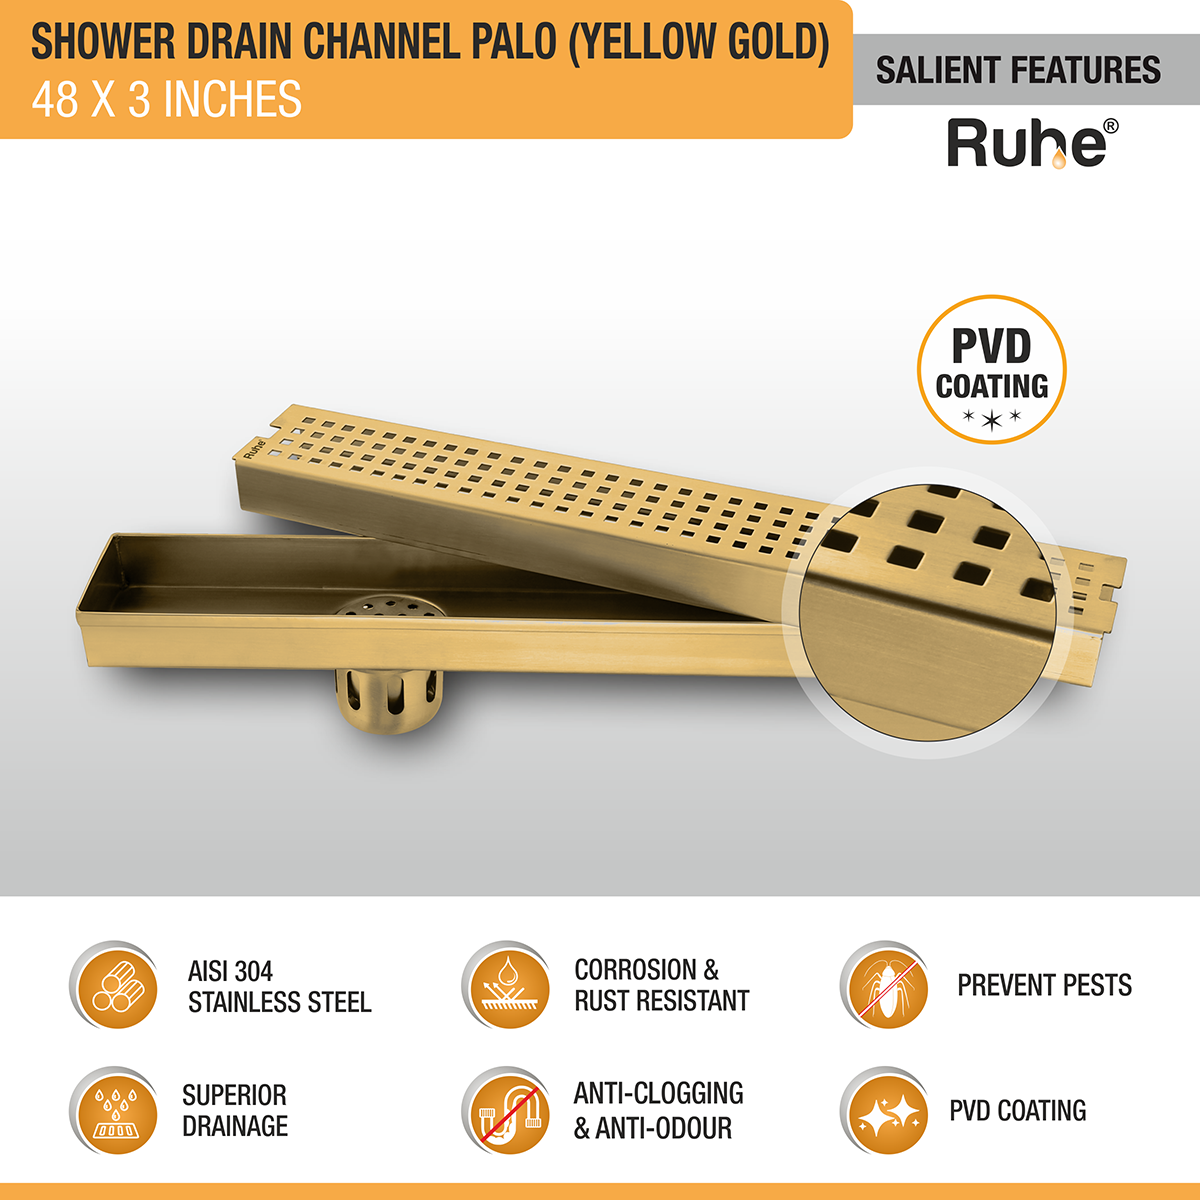 Palo Shower Drain Channel (48 x 3 Inches) YELLOW GOLD features